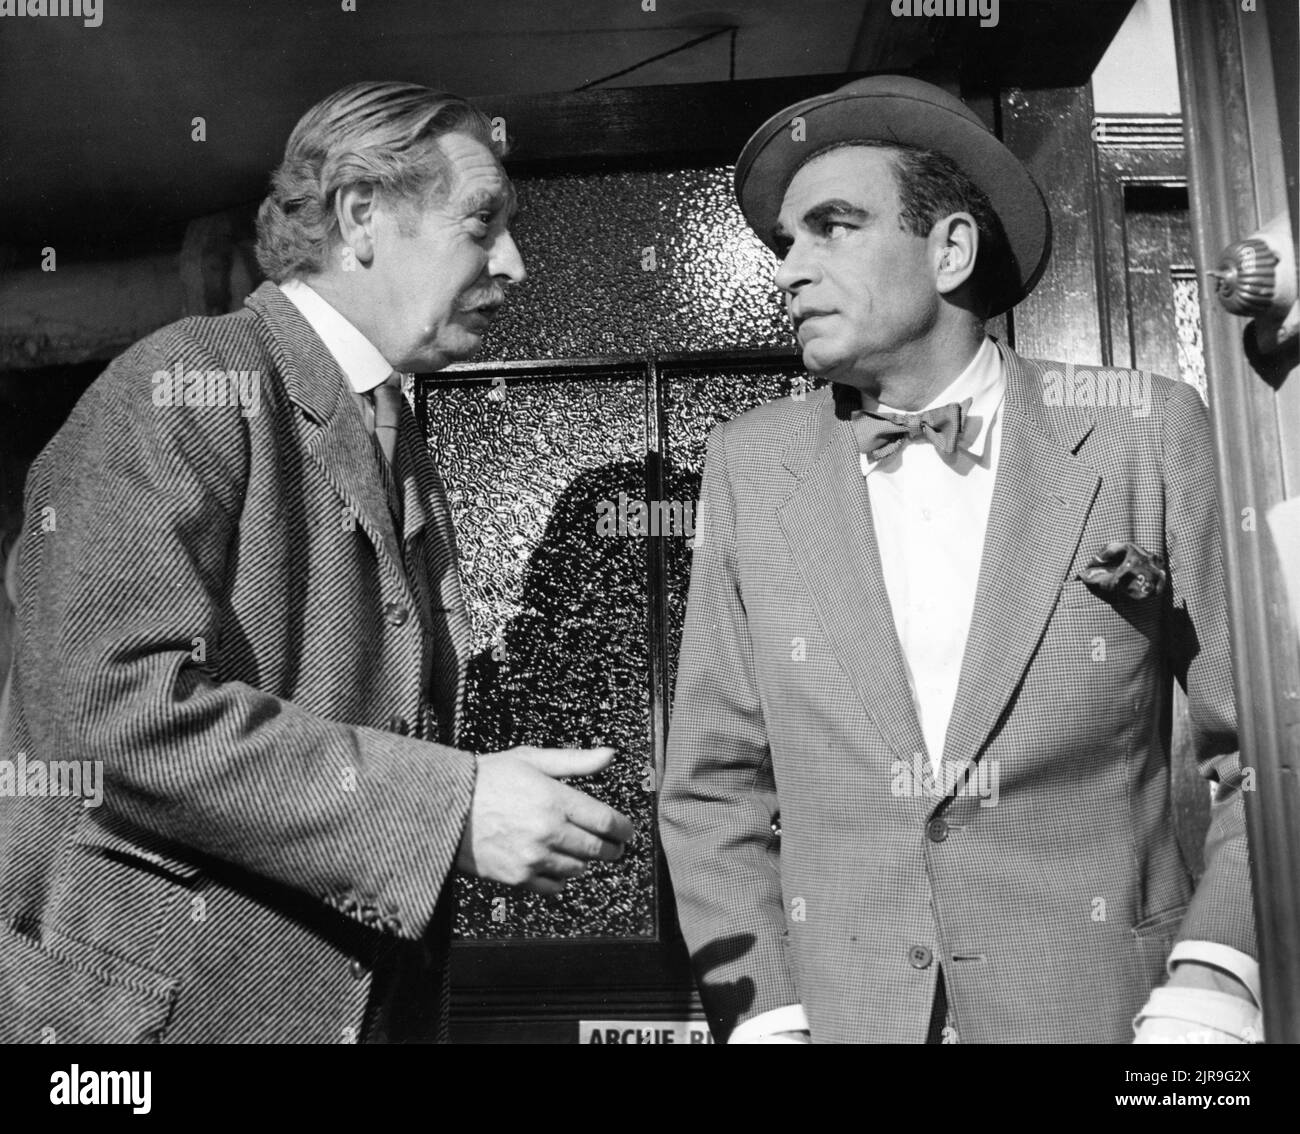 ROGER LIVESEY as Billy Rice and LAURENCE OLIVIER as Archie Rice in THE ENTERTAINER 1960 director TONY RICHARDSON screenplay John Osborne and Nigel Kneale adapted from the play by John Osborne music John Addison producer Harry Saltzman Woodfall Film Productions / British Lion Films Stock Photo